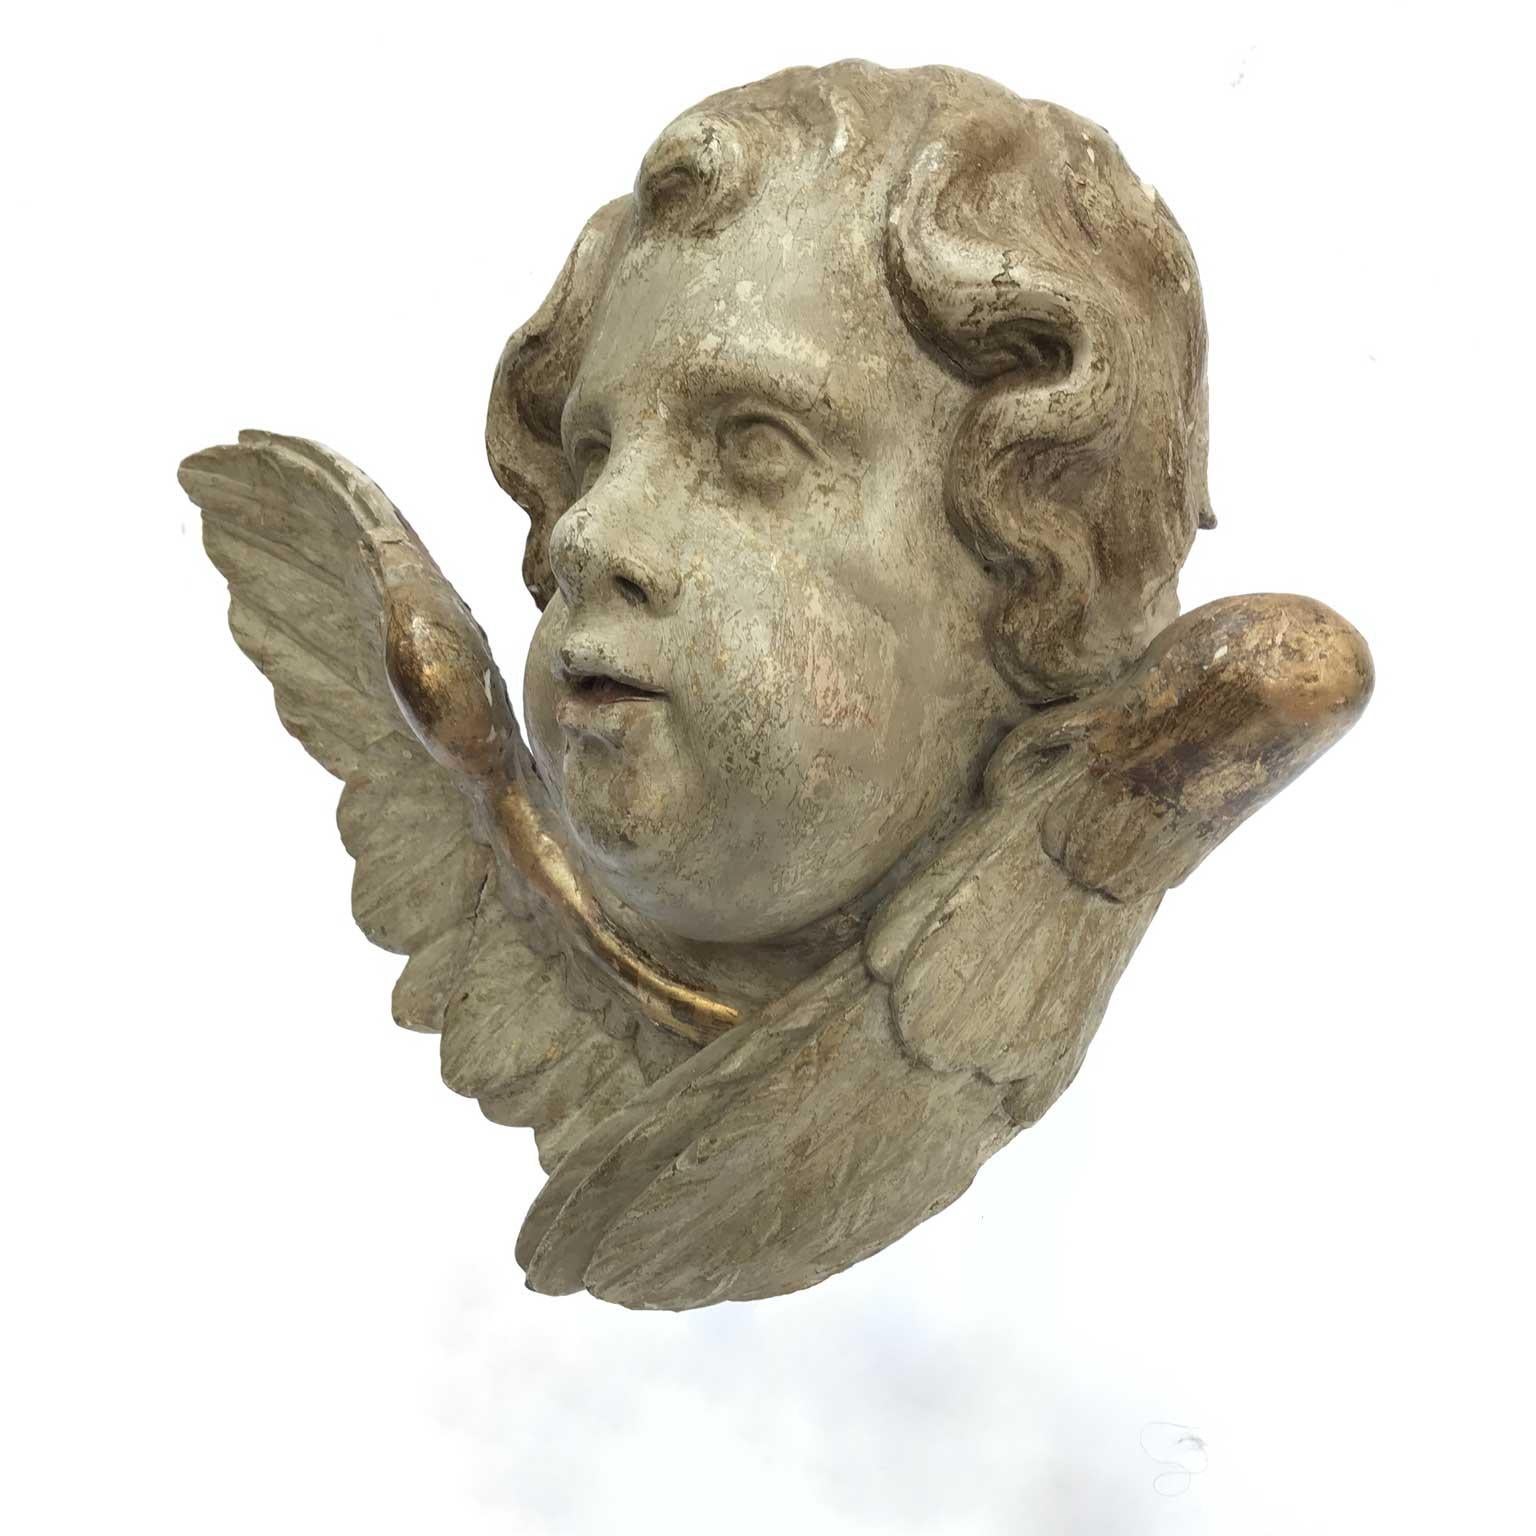 Pair of antique Italian figurative sculptures cherub heads dating back to mid-18th century, two carved linden wood curled angel heads figures, with later painting.
The pair of this antique winged putti heads should be originally part of a